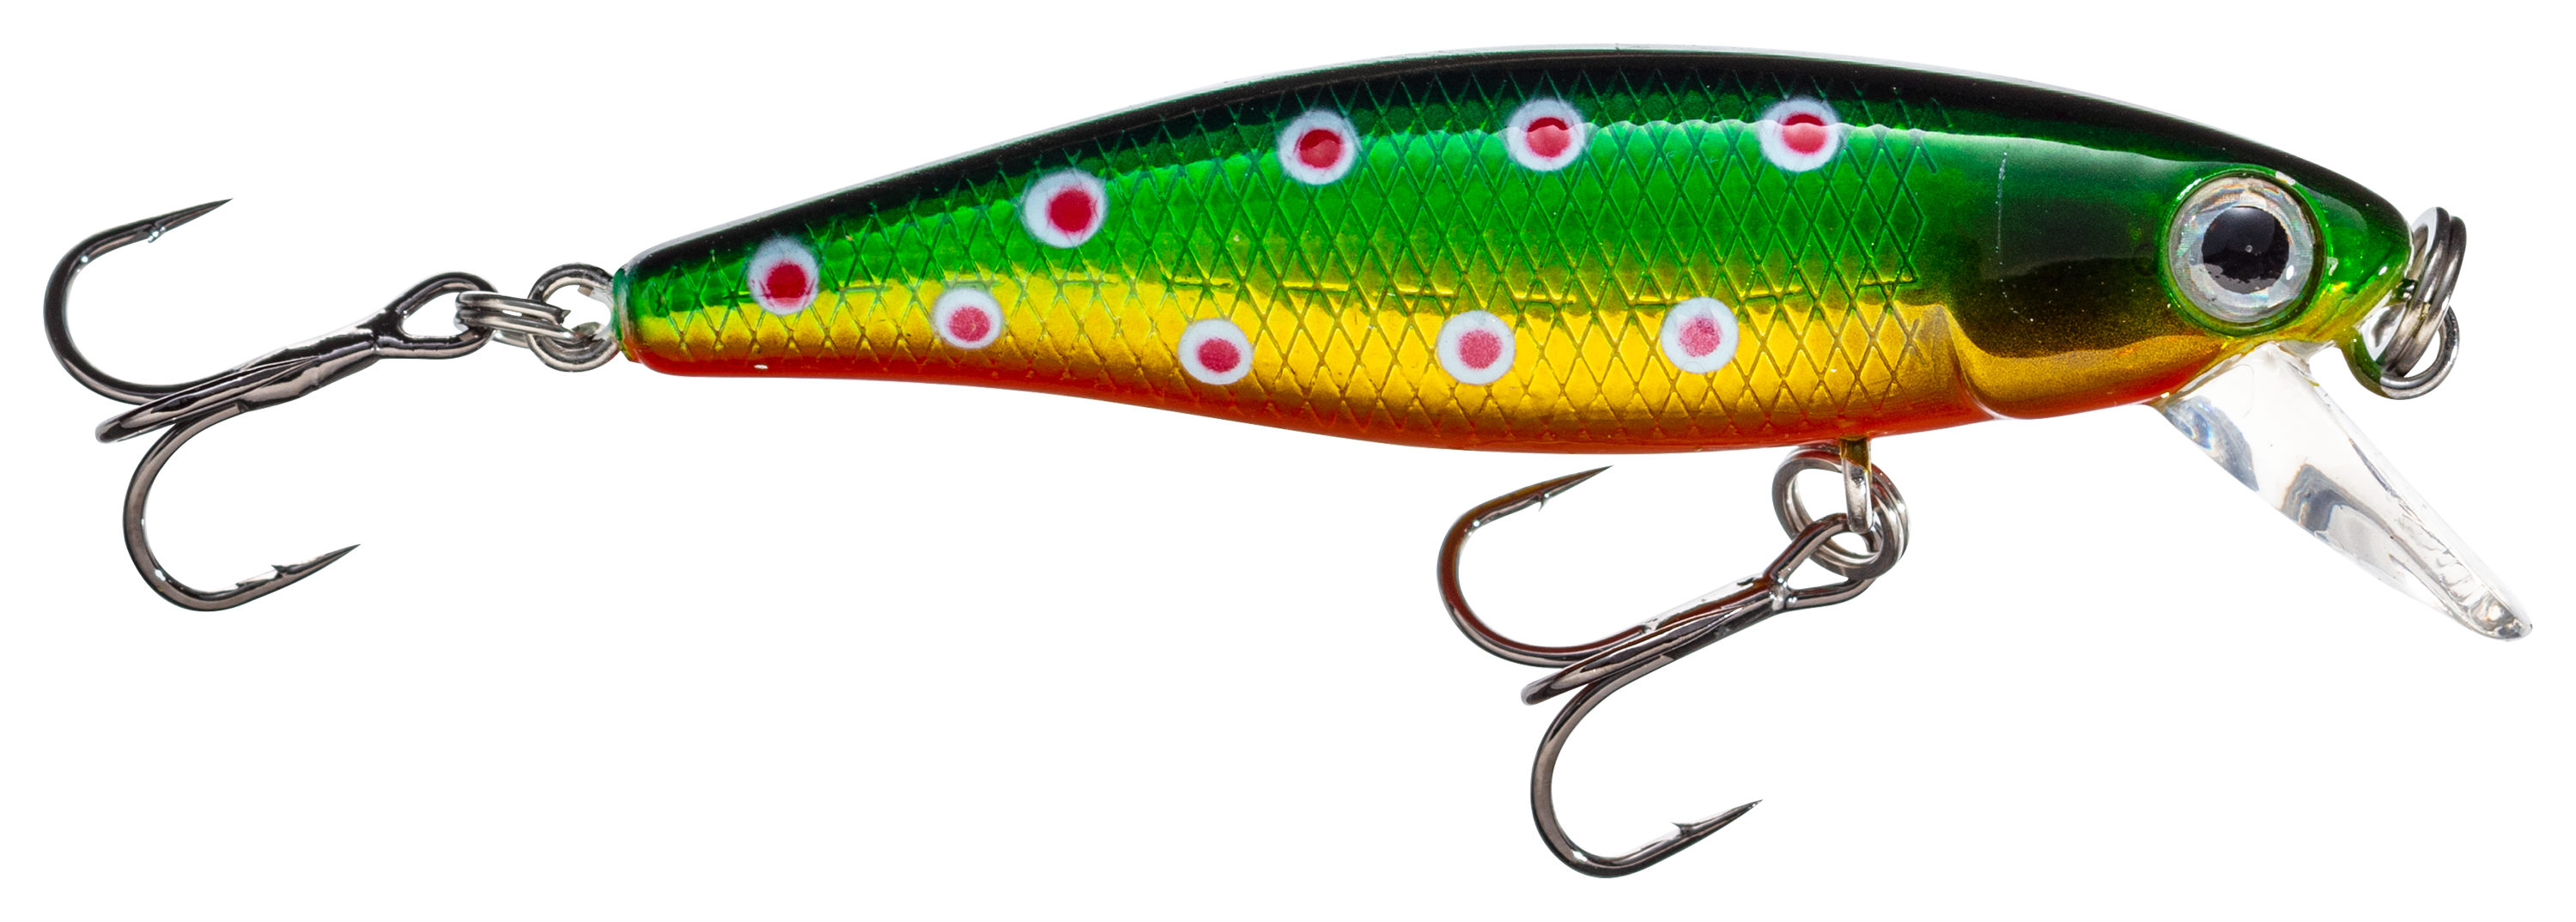 Dynamic Lures HD Trout - Fire Craw